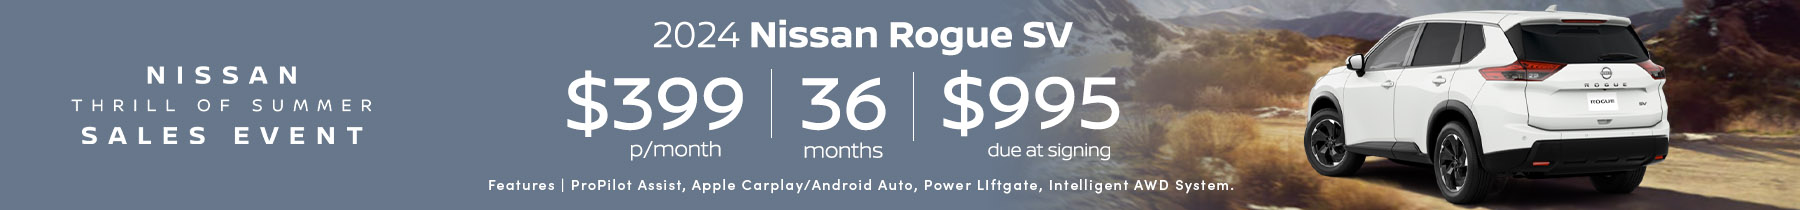 2024 Rogue SV -   Lease Offer: $399 per month Up to 36 months  $995 due at signing.